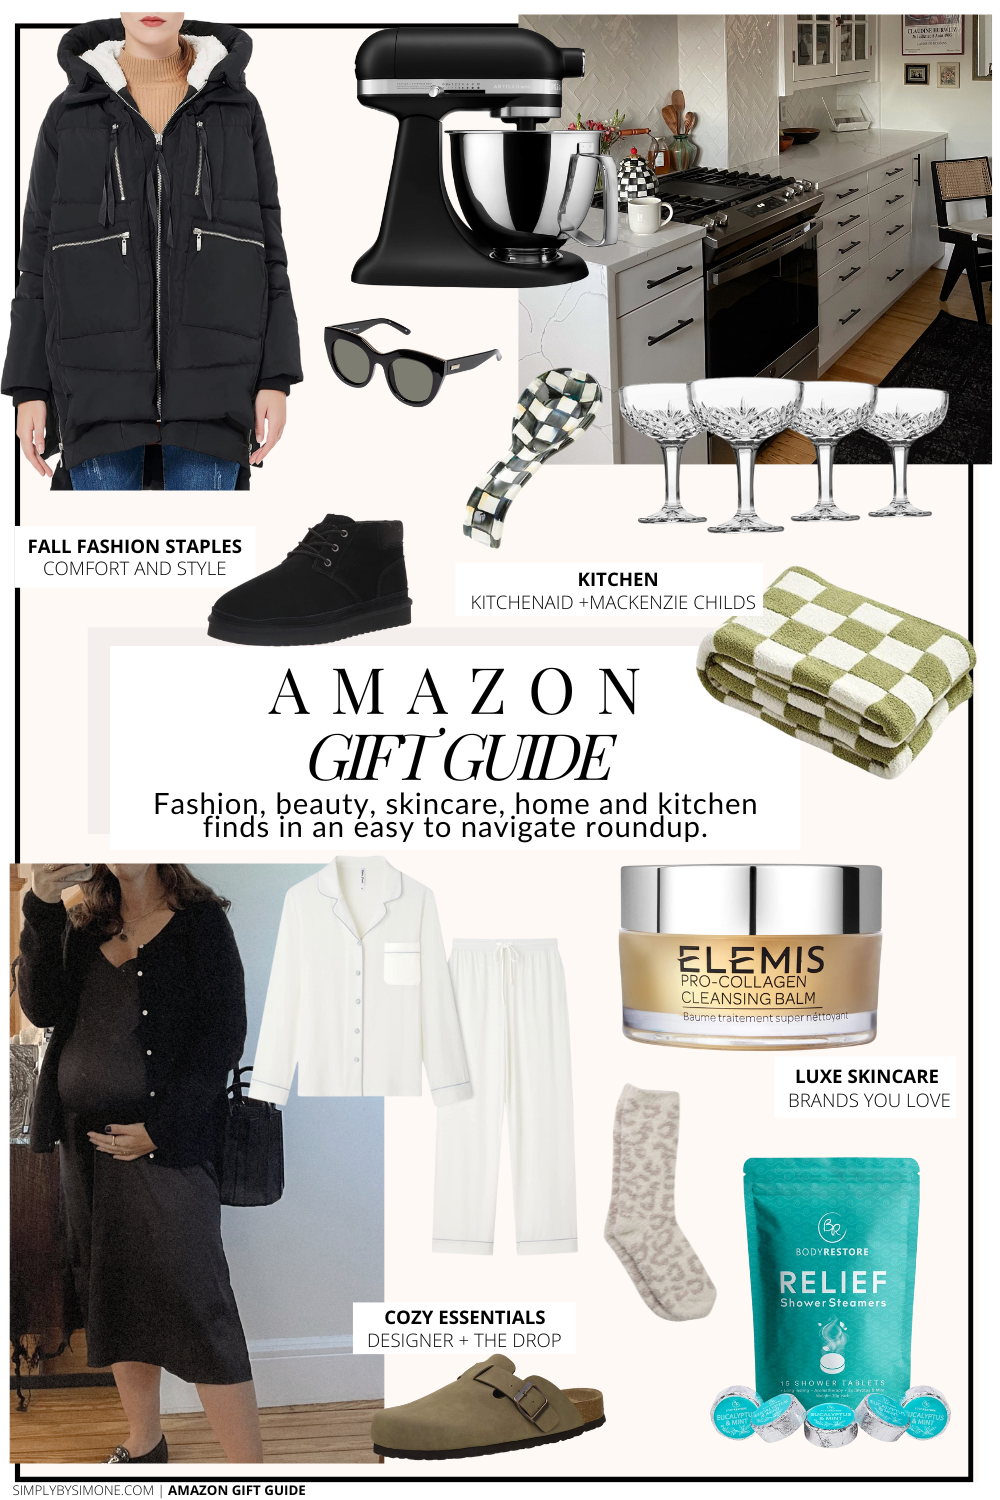 Cozy Stylish Gift Ideas for Holiday